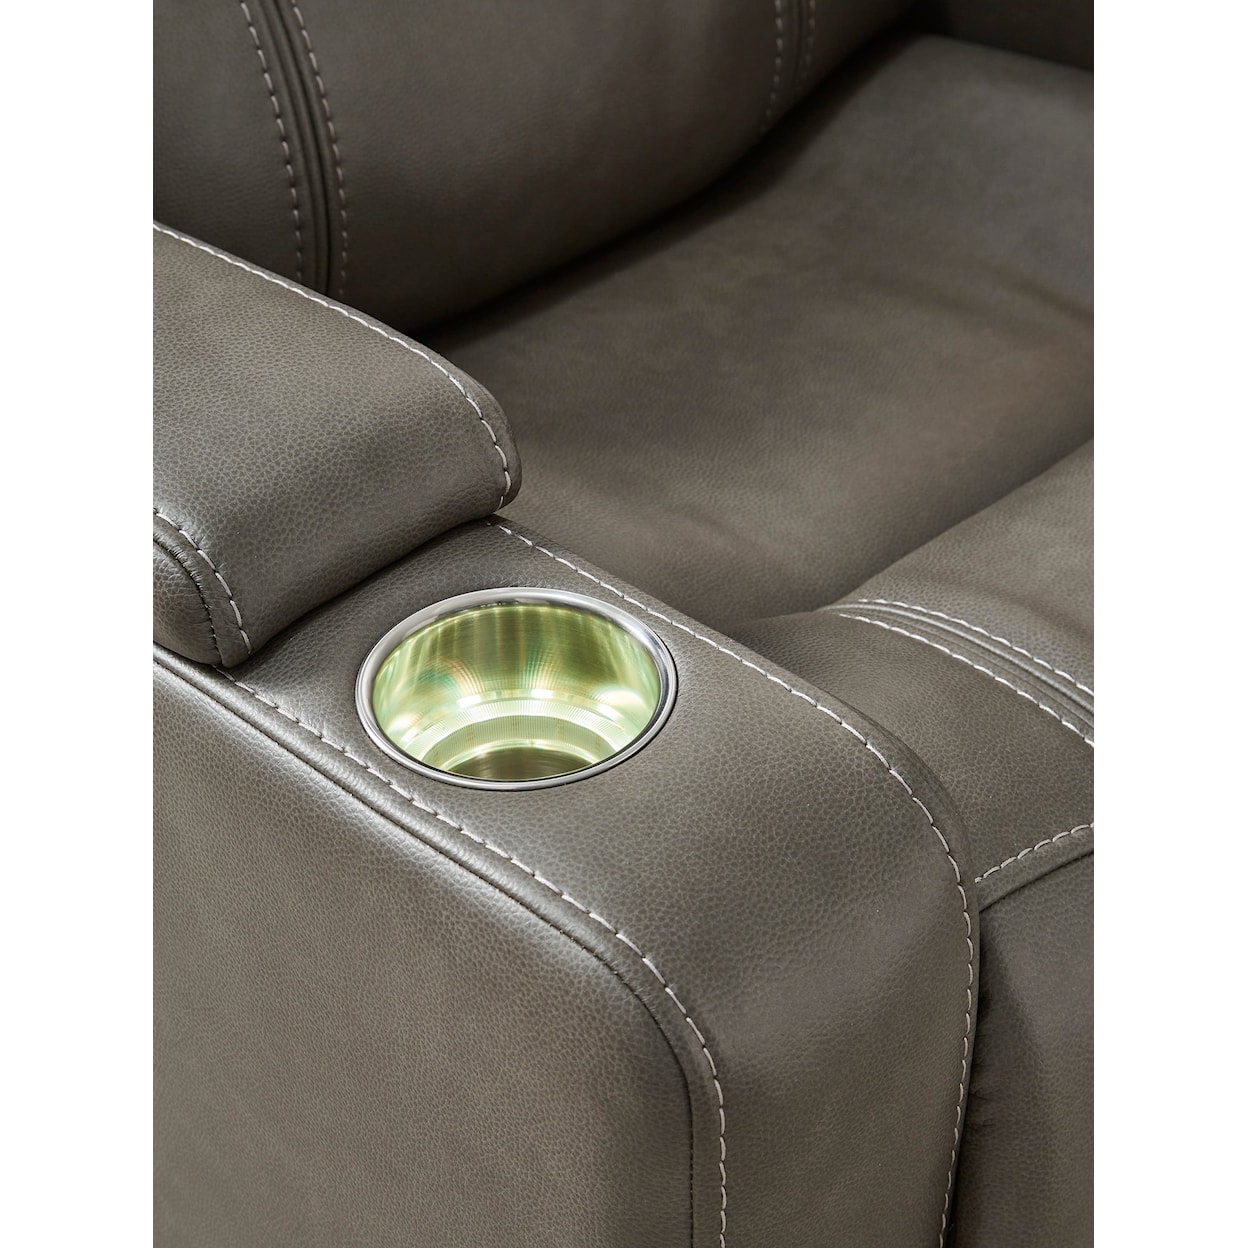 Signature Design by Ashley Crenshaw Power Recliner